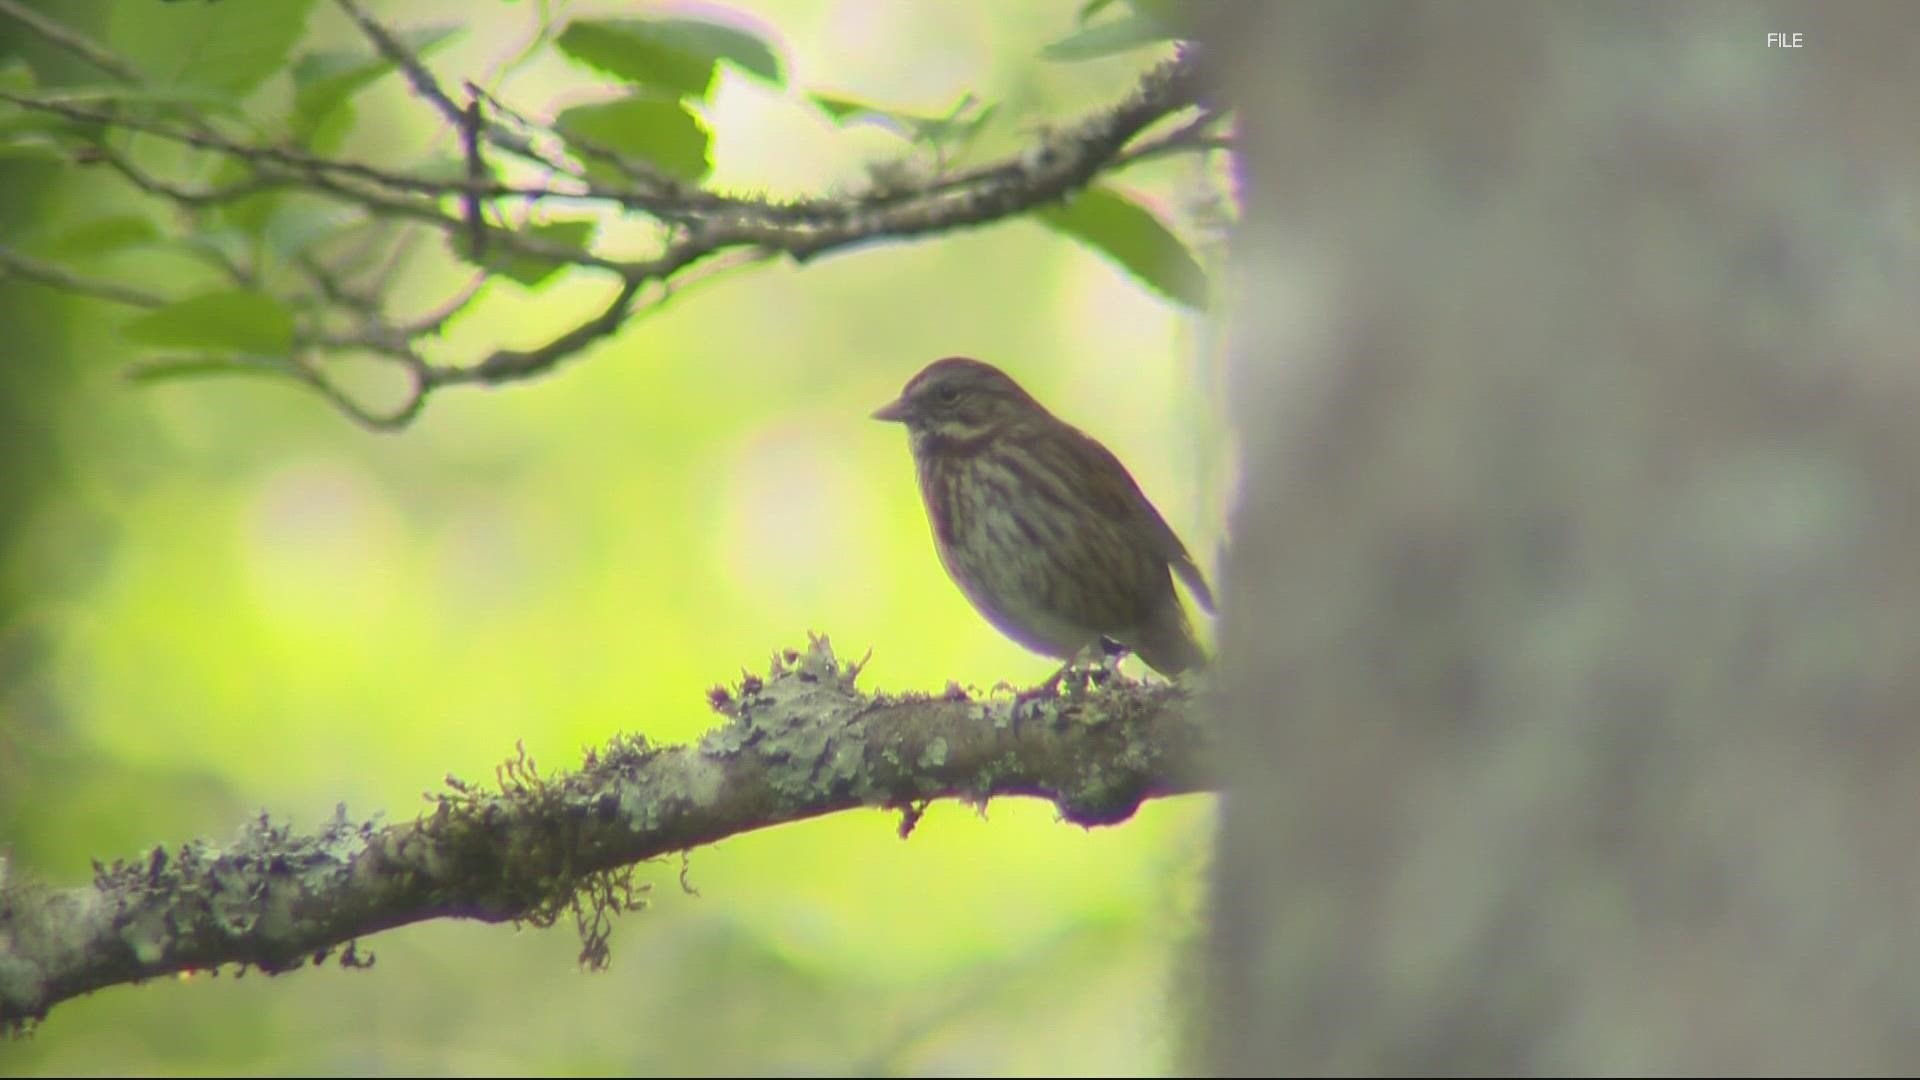 An estimated 3.9 million birds will fly over Oregon for spring migration. The Portland Audubon is asking people to help by turning off unnecessary lights at night.